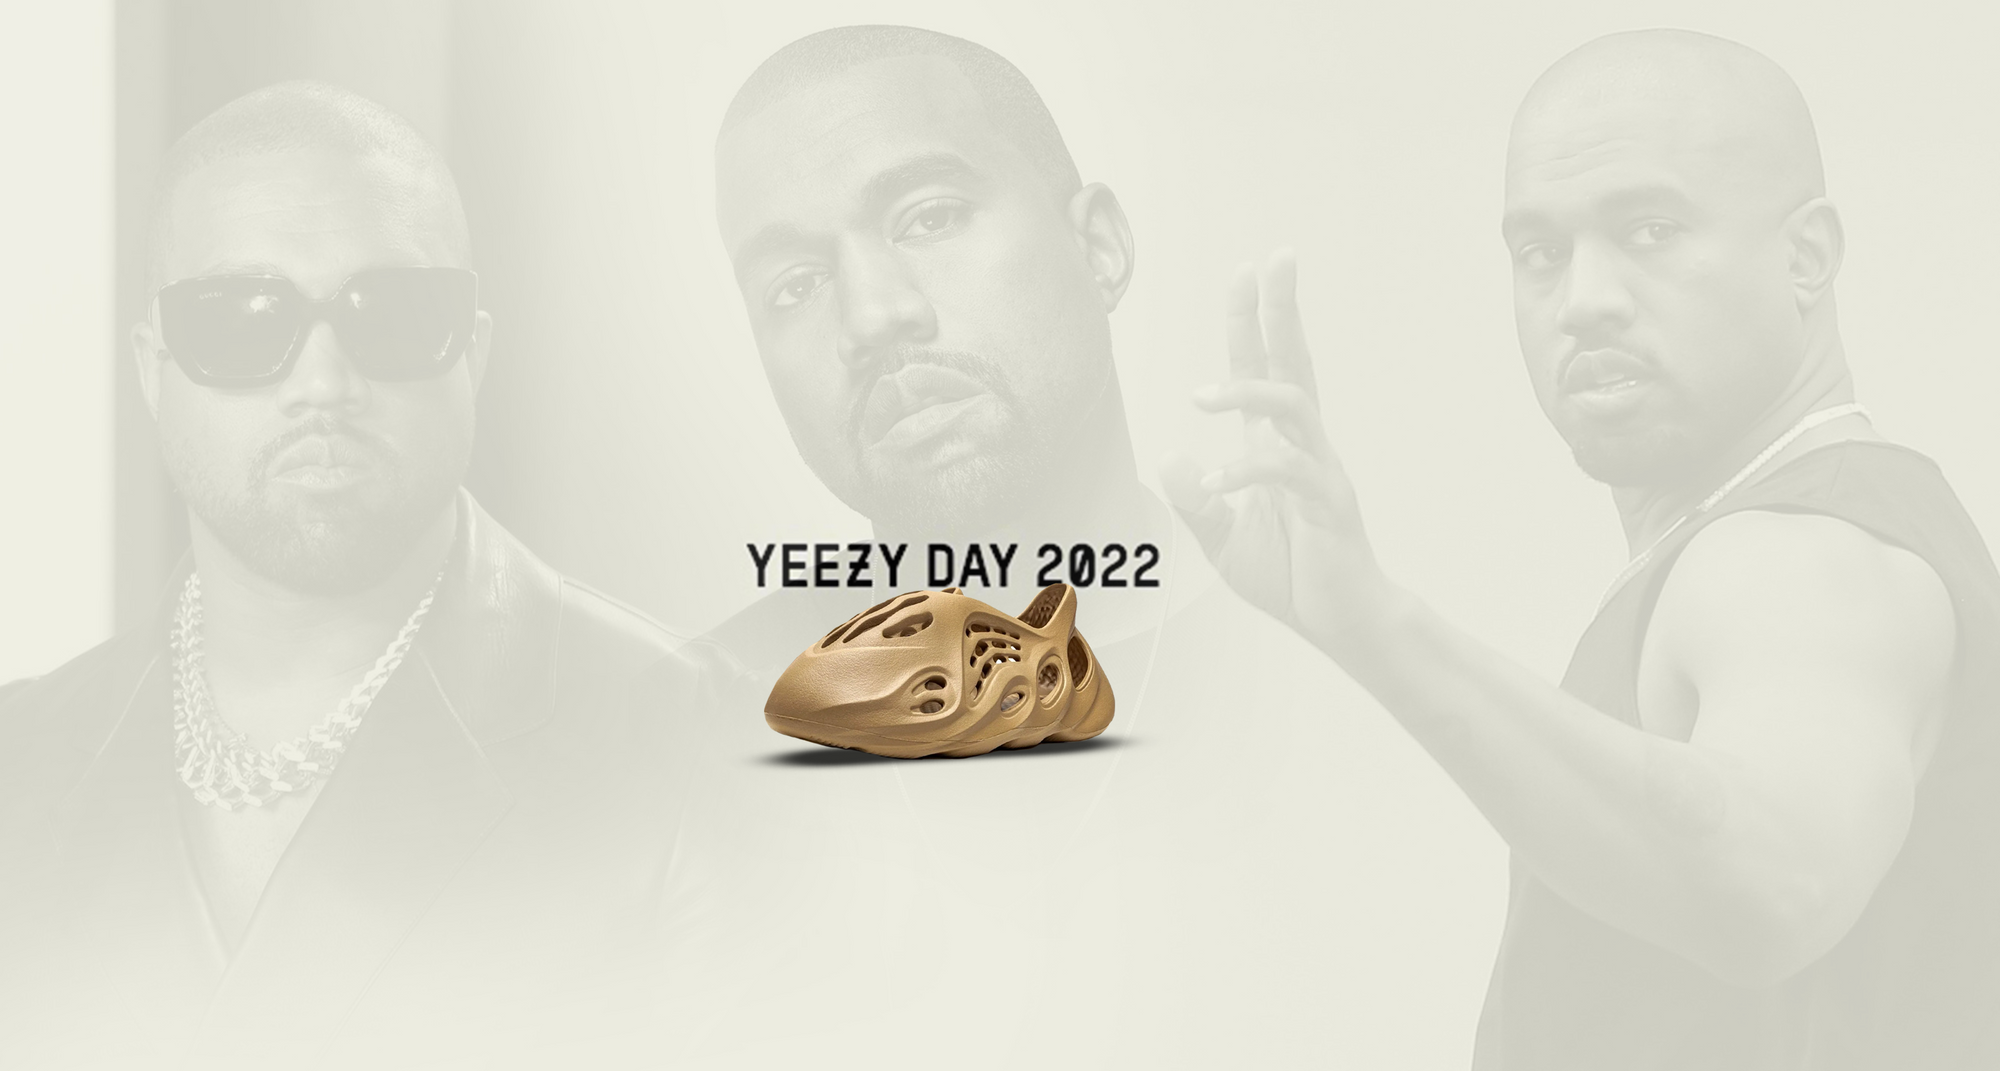 A Closer Look at YEEZY Day 2022